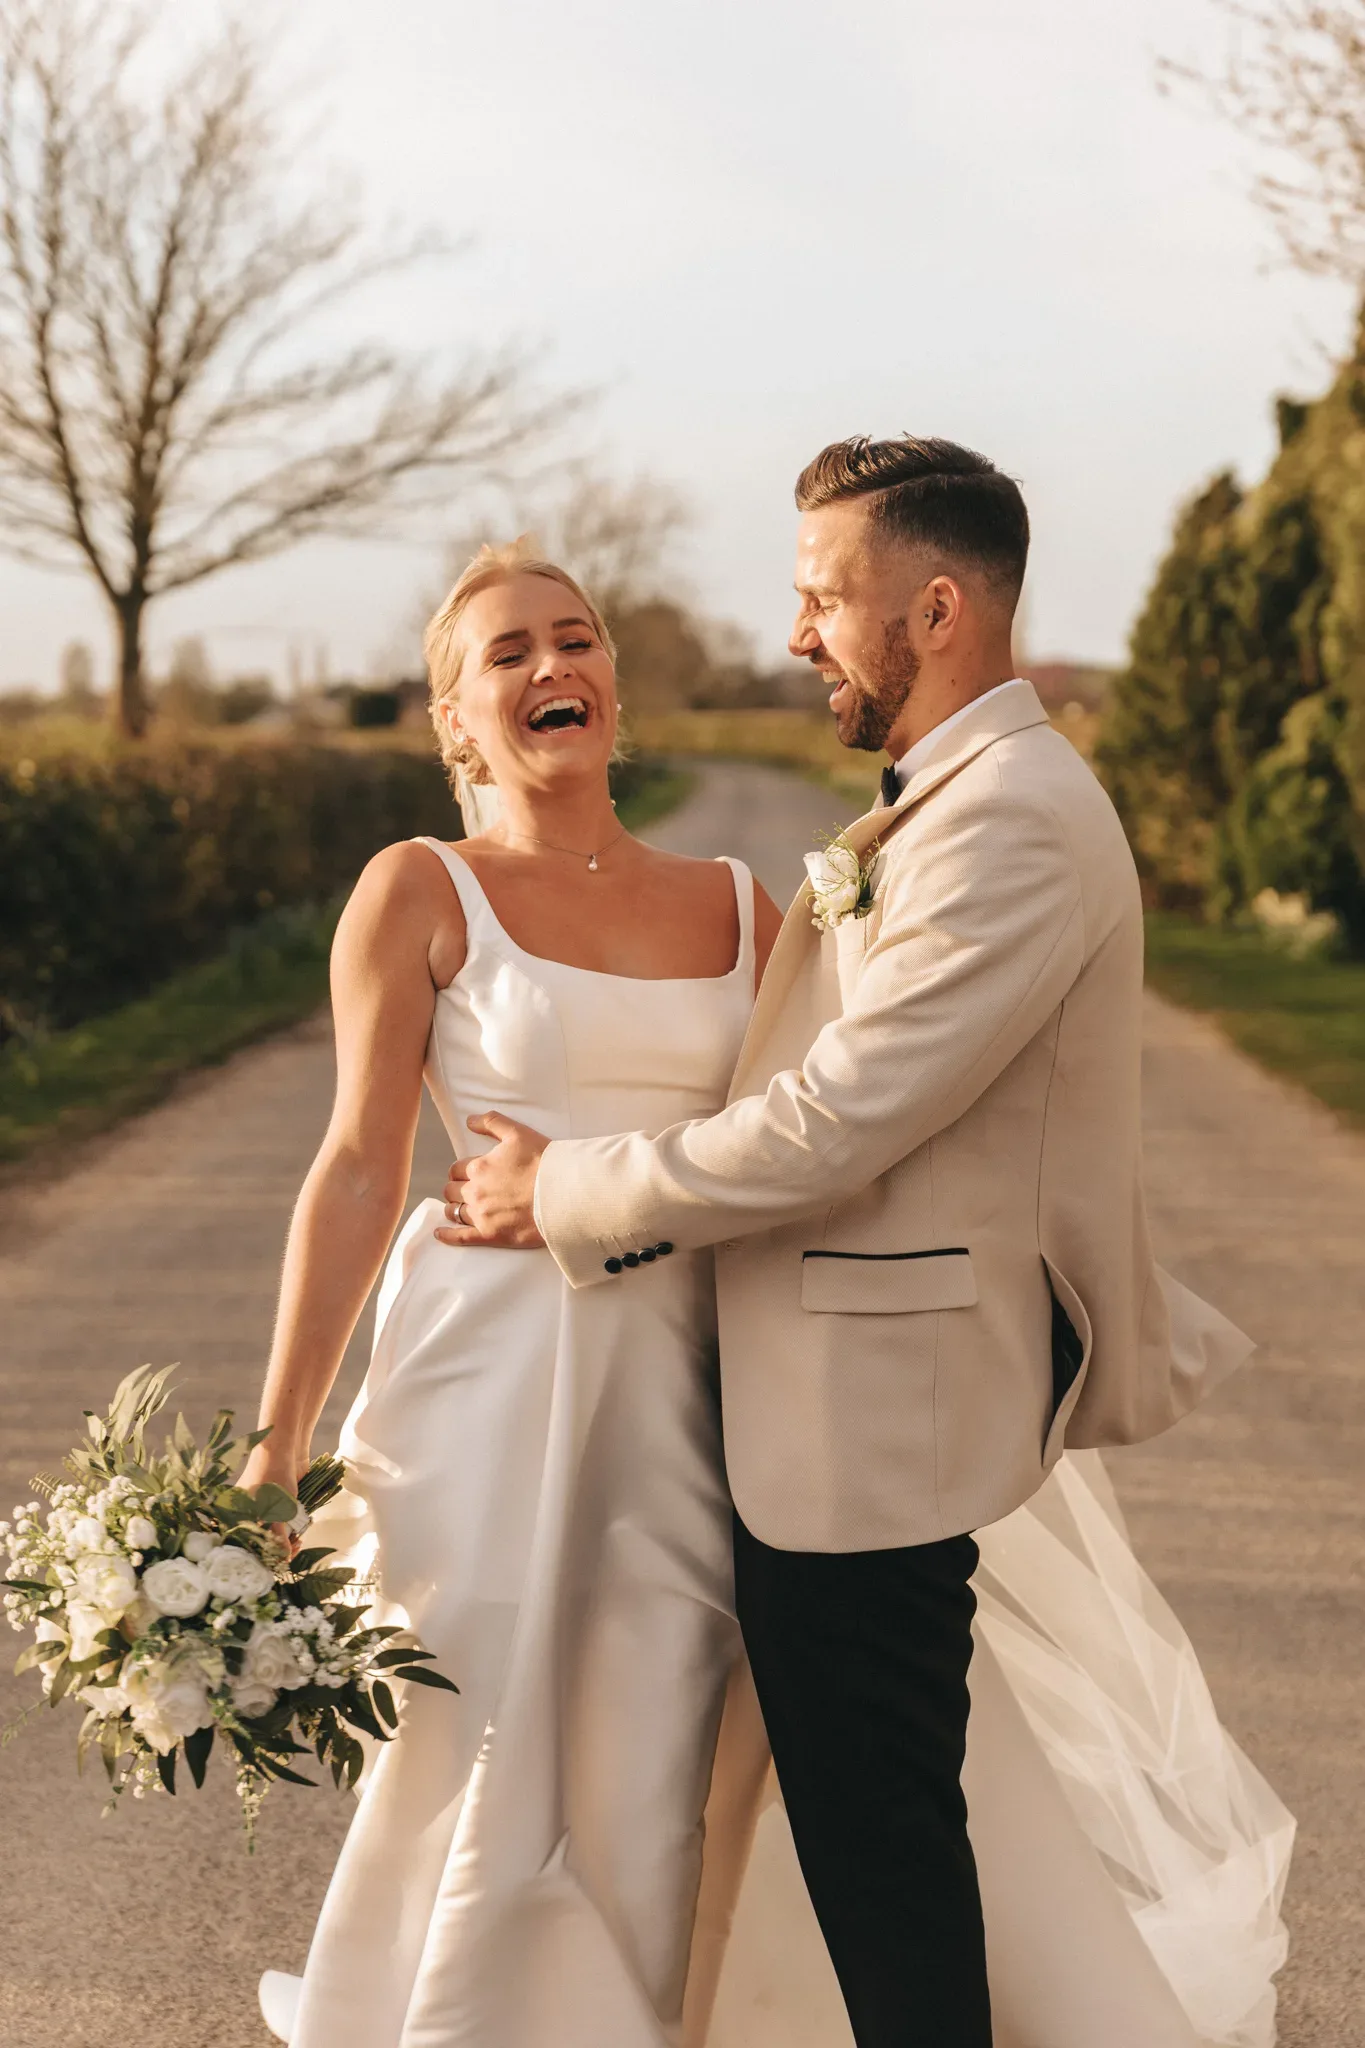 A joyful bride and groom laugh together on a sunlit path. the bride, in an elegant white gown, holds a bouquet; the groom, in a beige suit, gently lifts her. countryside scenery surrounds them.